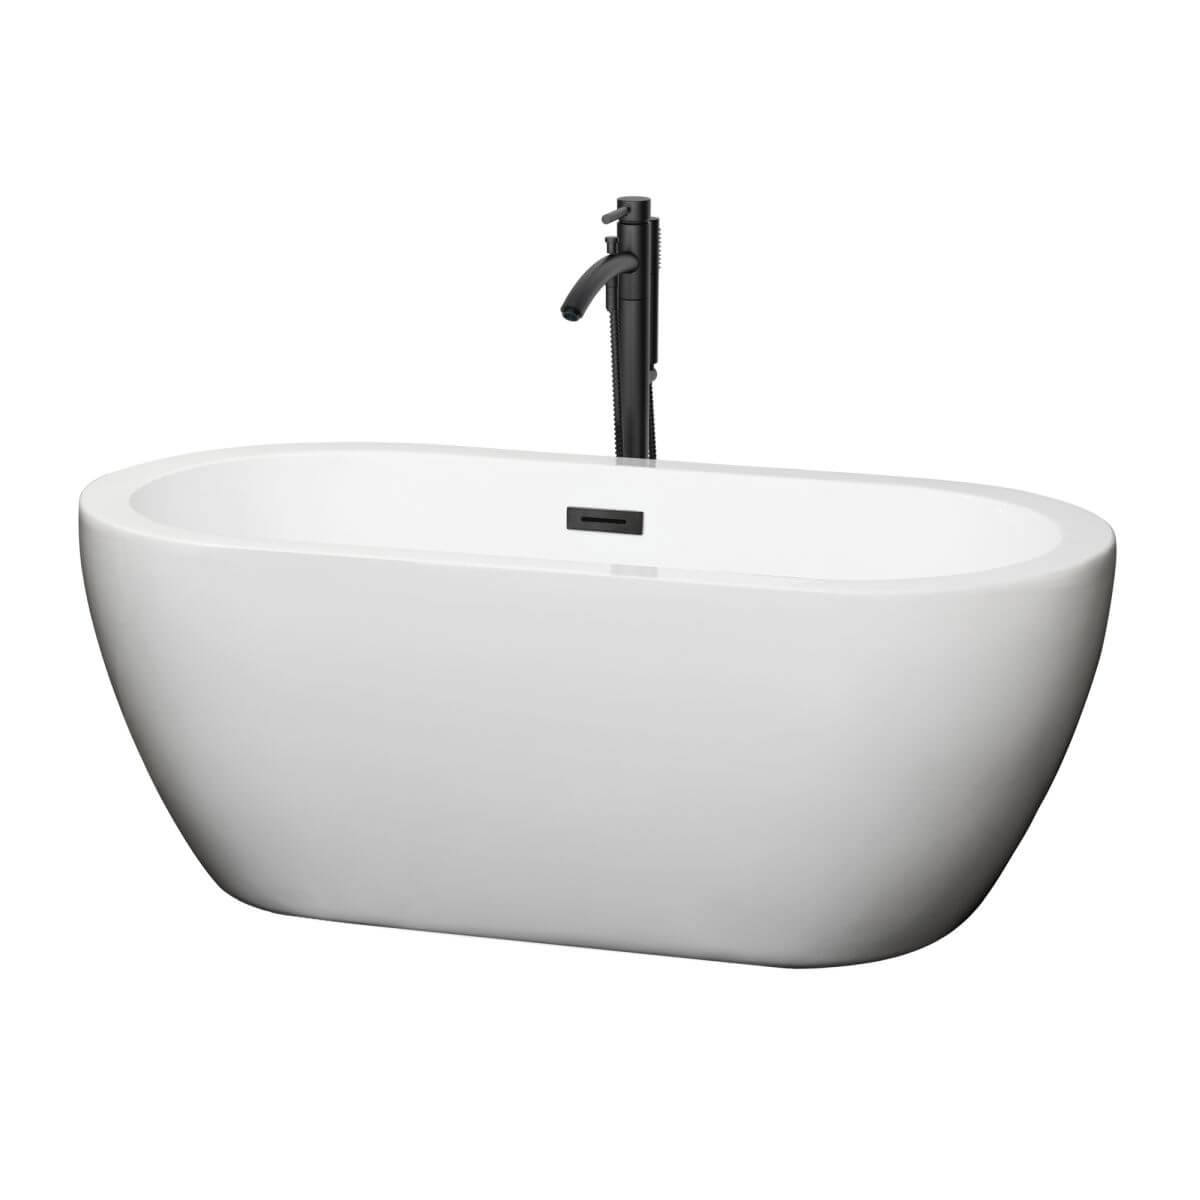 Wyndham Collection Soho 60 inch Freestanding Bathtub in White with Floor Mounted Faucet, Drain and Overflow Trim in Matte Black - WCOBT100260MBATPBK